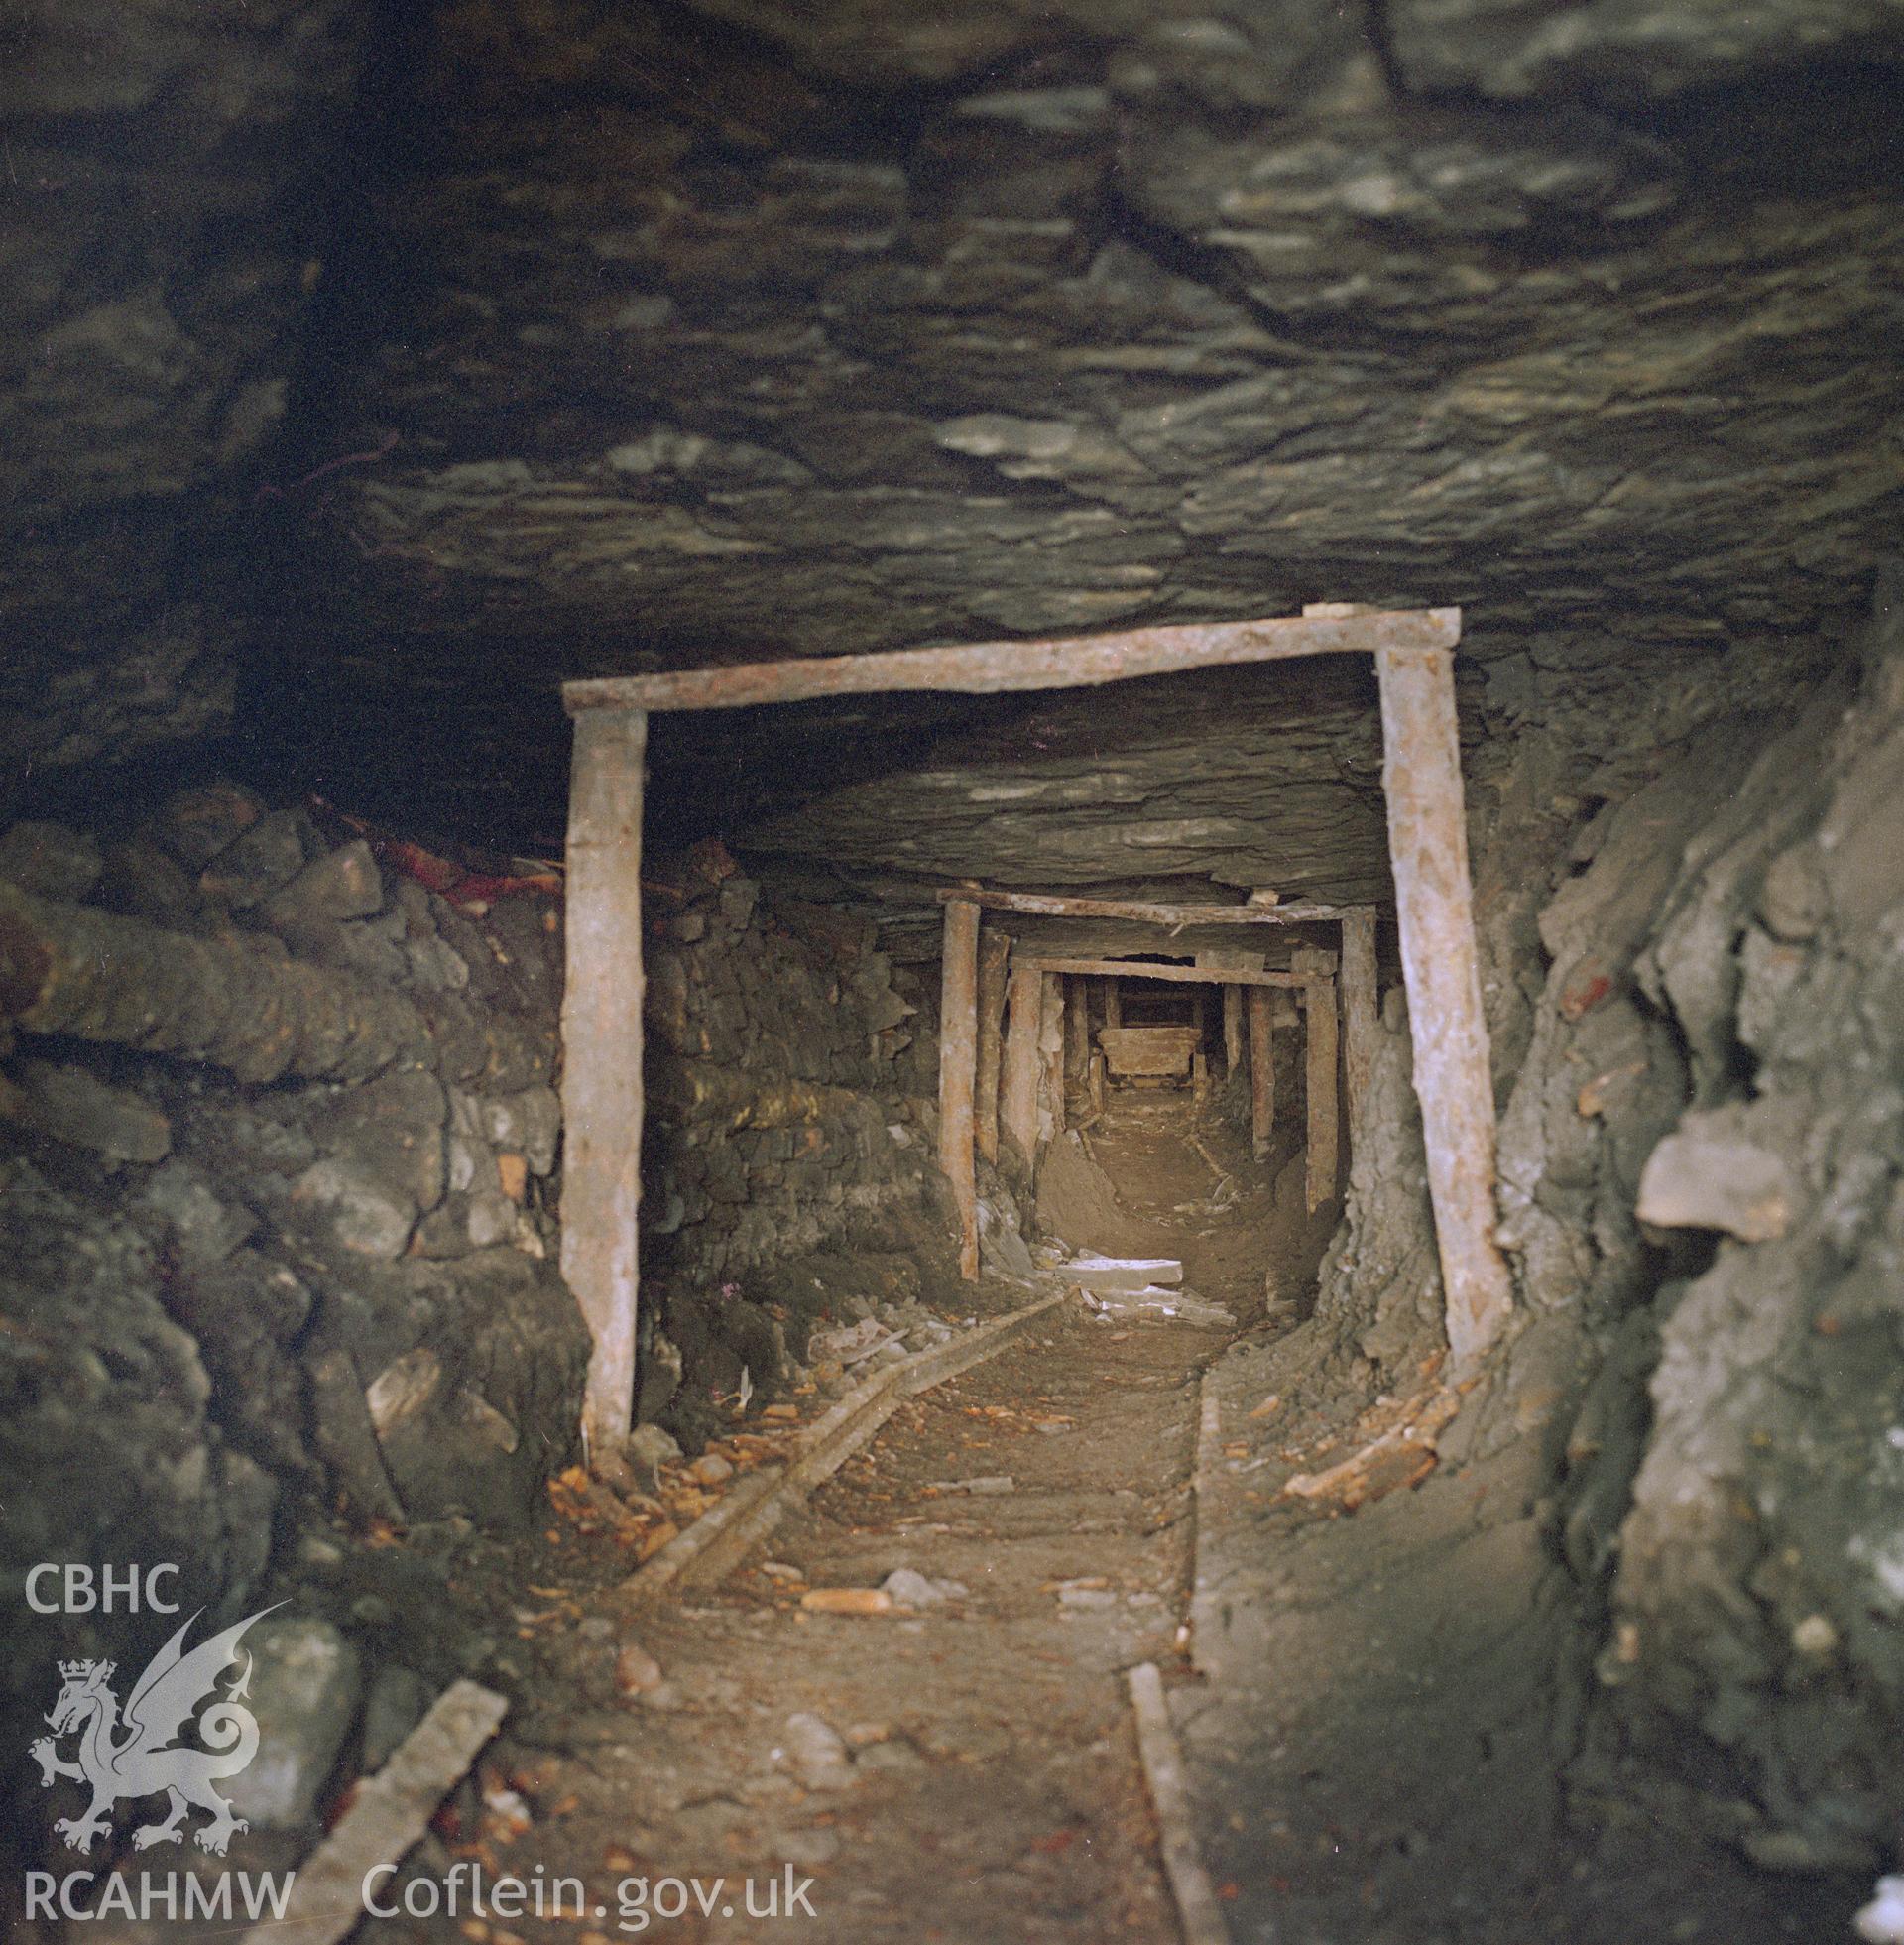 Digital copy of an acetate negative showing old iron-stone workings in the Coity Pits at Big Pit, from the John Cornwell Collection.